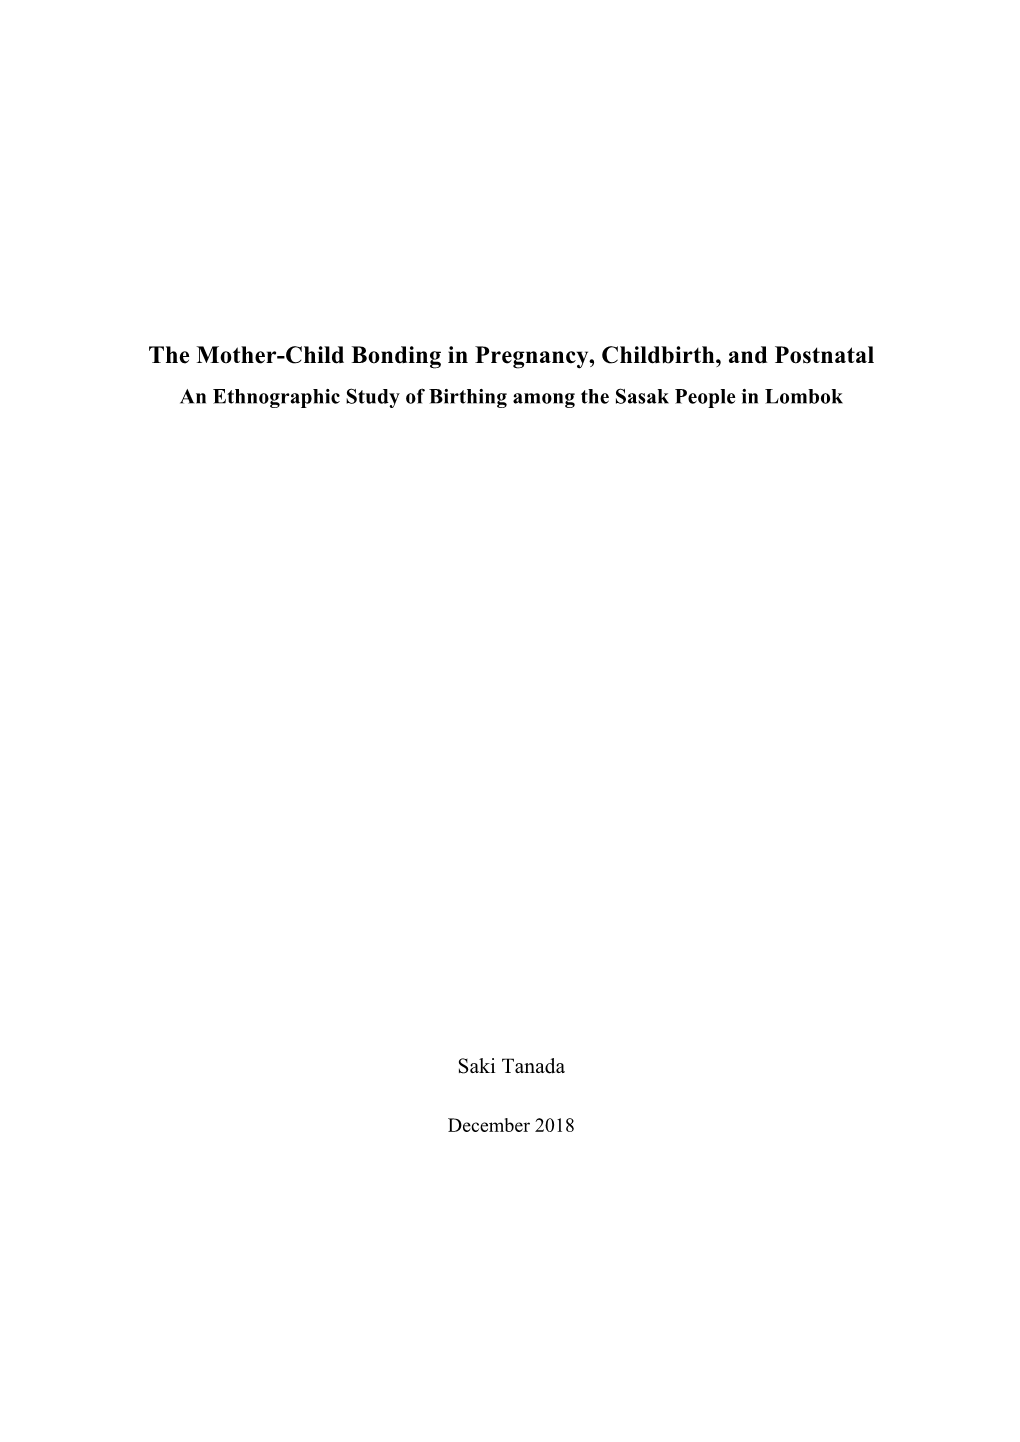 The Mother-Child Bonding in Pregnancy, Childbirth, and Postnatal� an Ethnographic Study of Birthing Among the Sasak People in Lombok